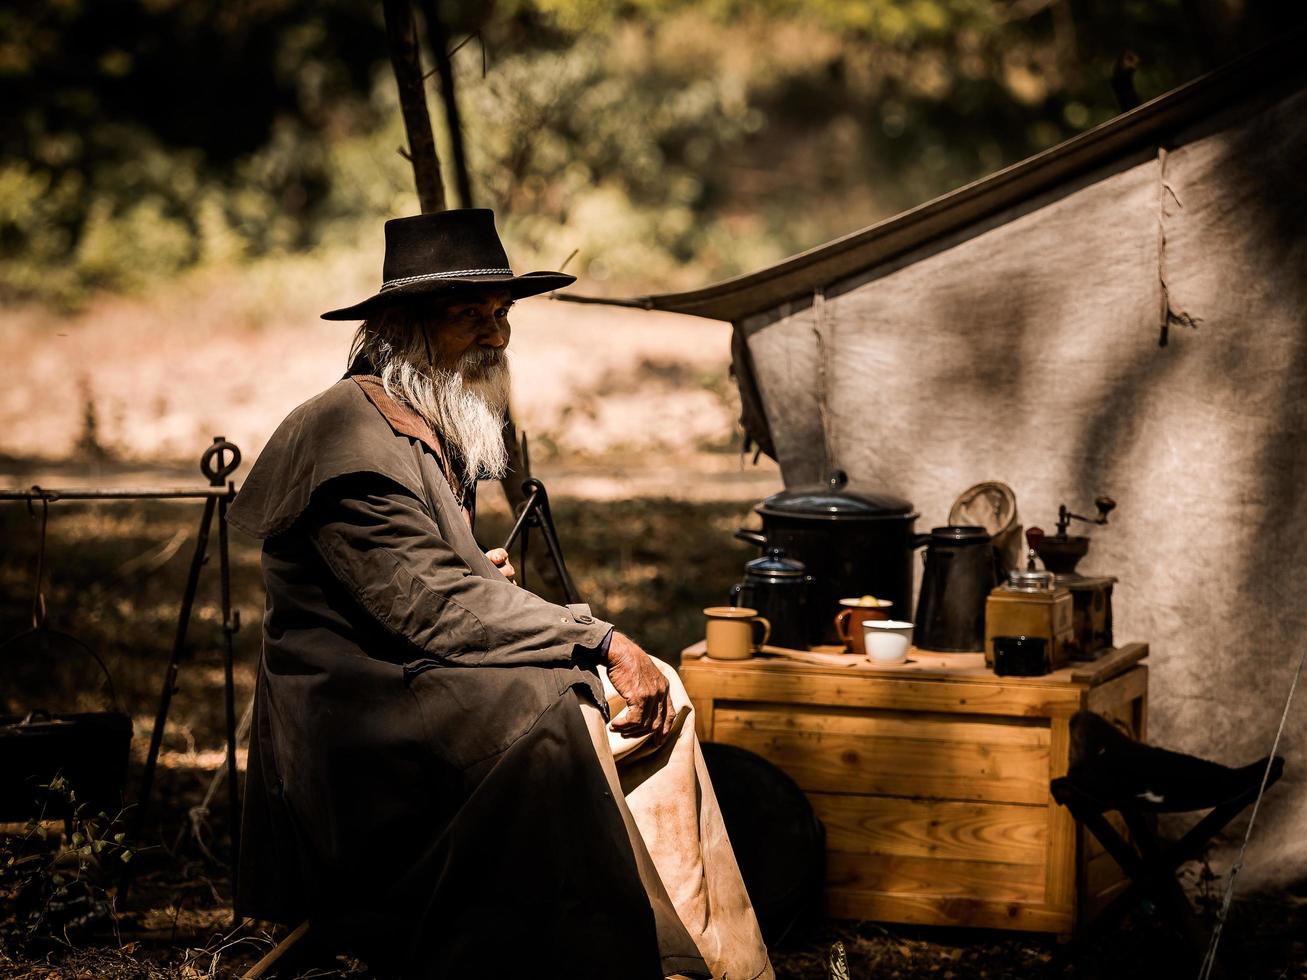 A senior cowboy sat with a gun to guard the safety of the camp in the western area photo